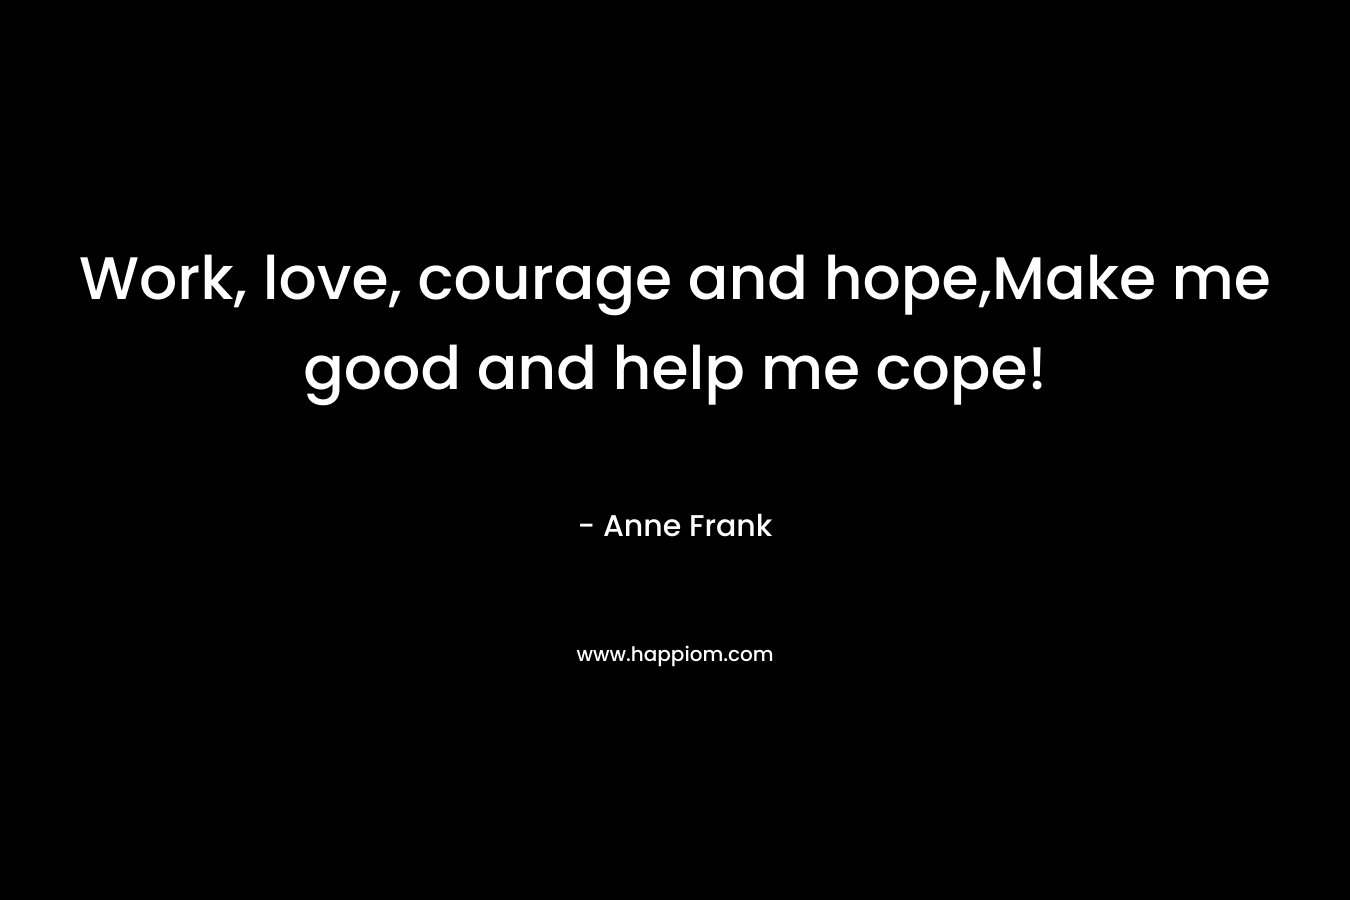 Work, love, courage and hope,Make me good and help me cope!